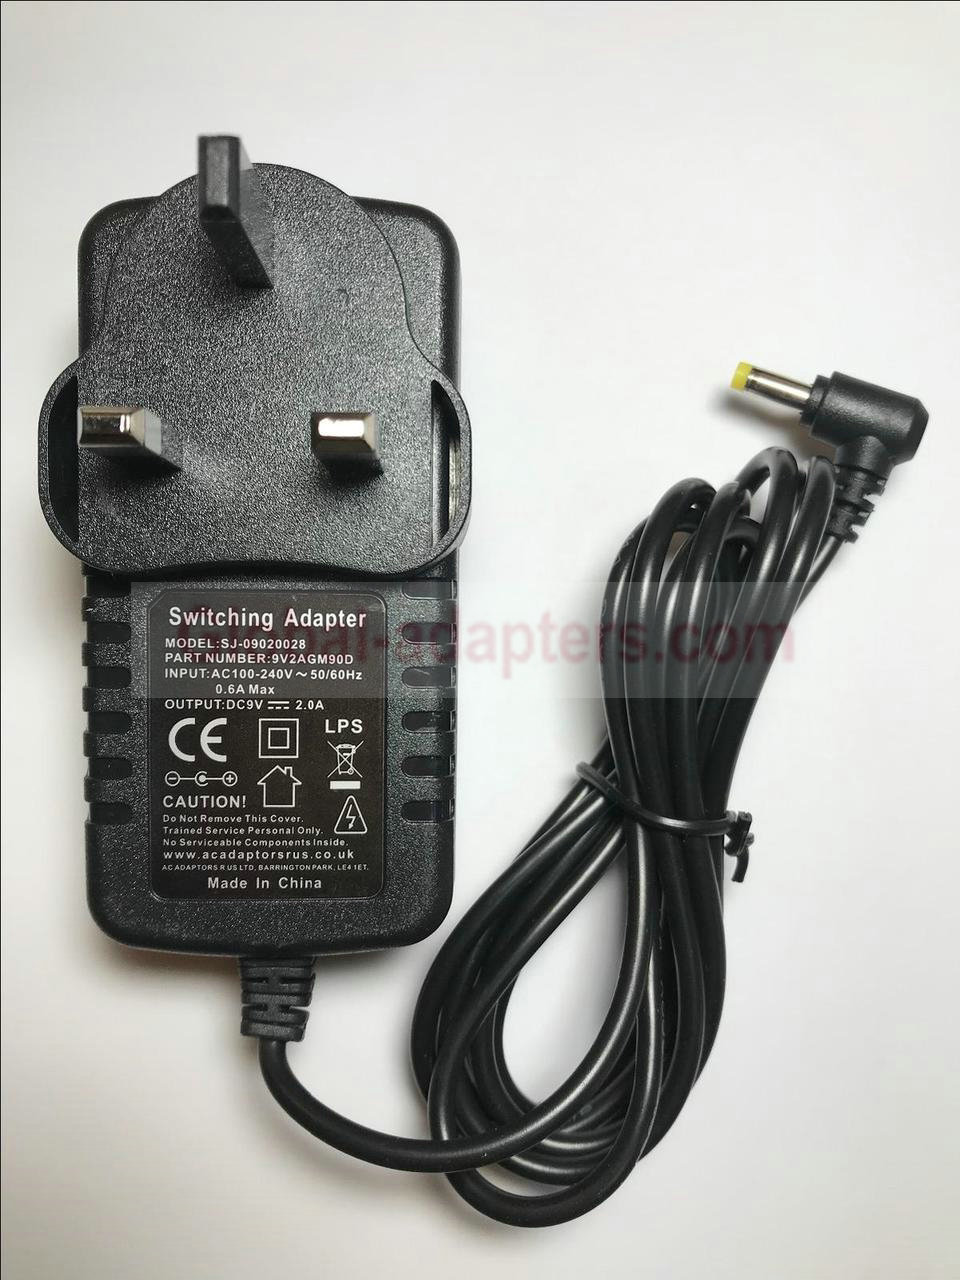 New DC9V 2A SJ-09020028 9V2AGM90D Power Supply Switching Adapter